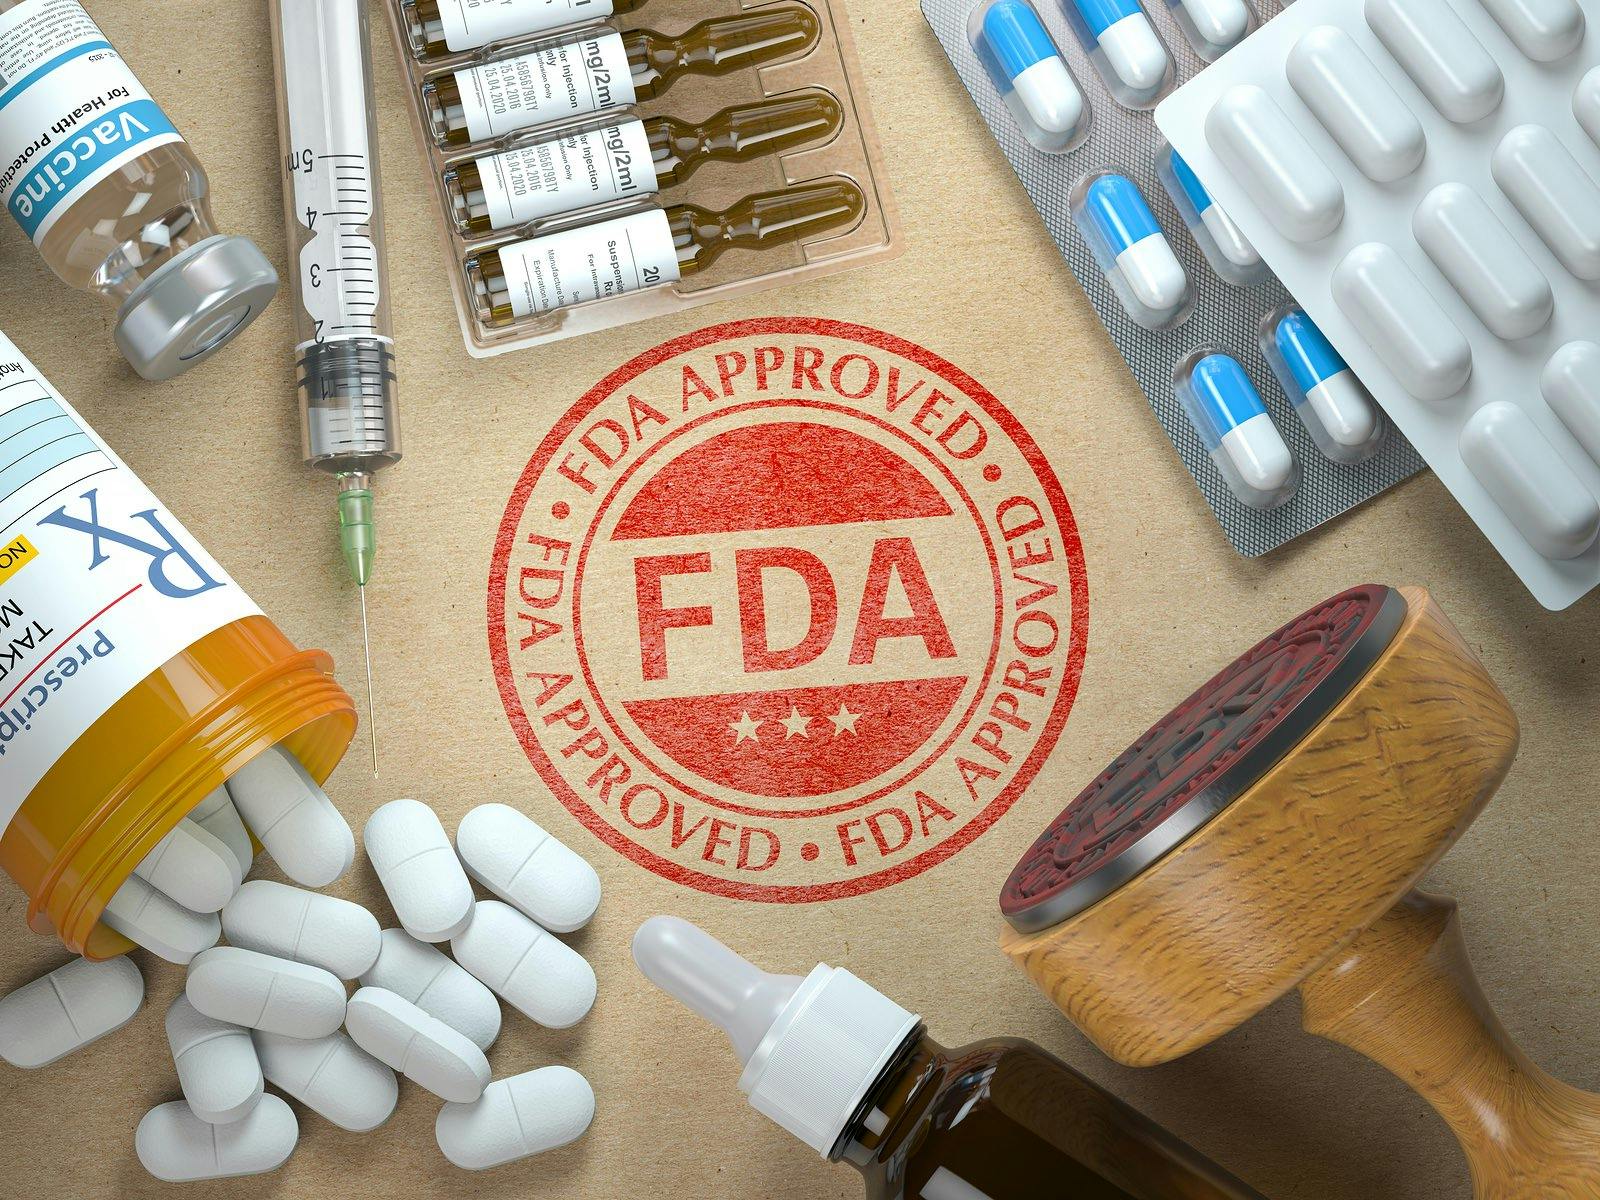 FDA-approved pills, ampules and injections